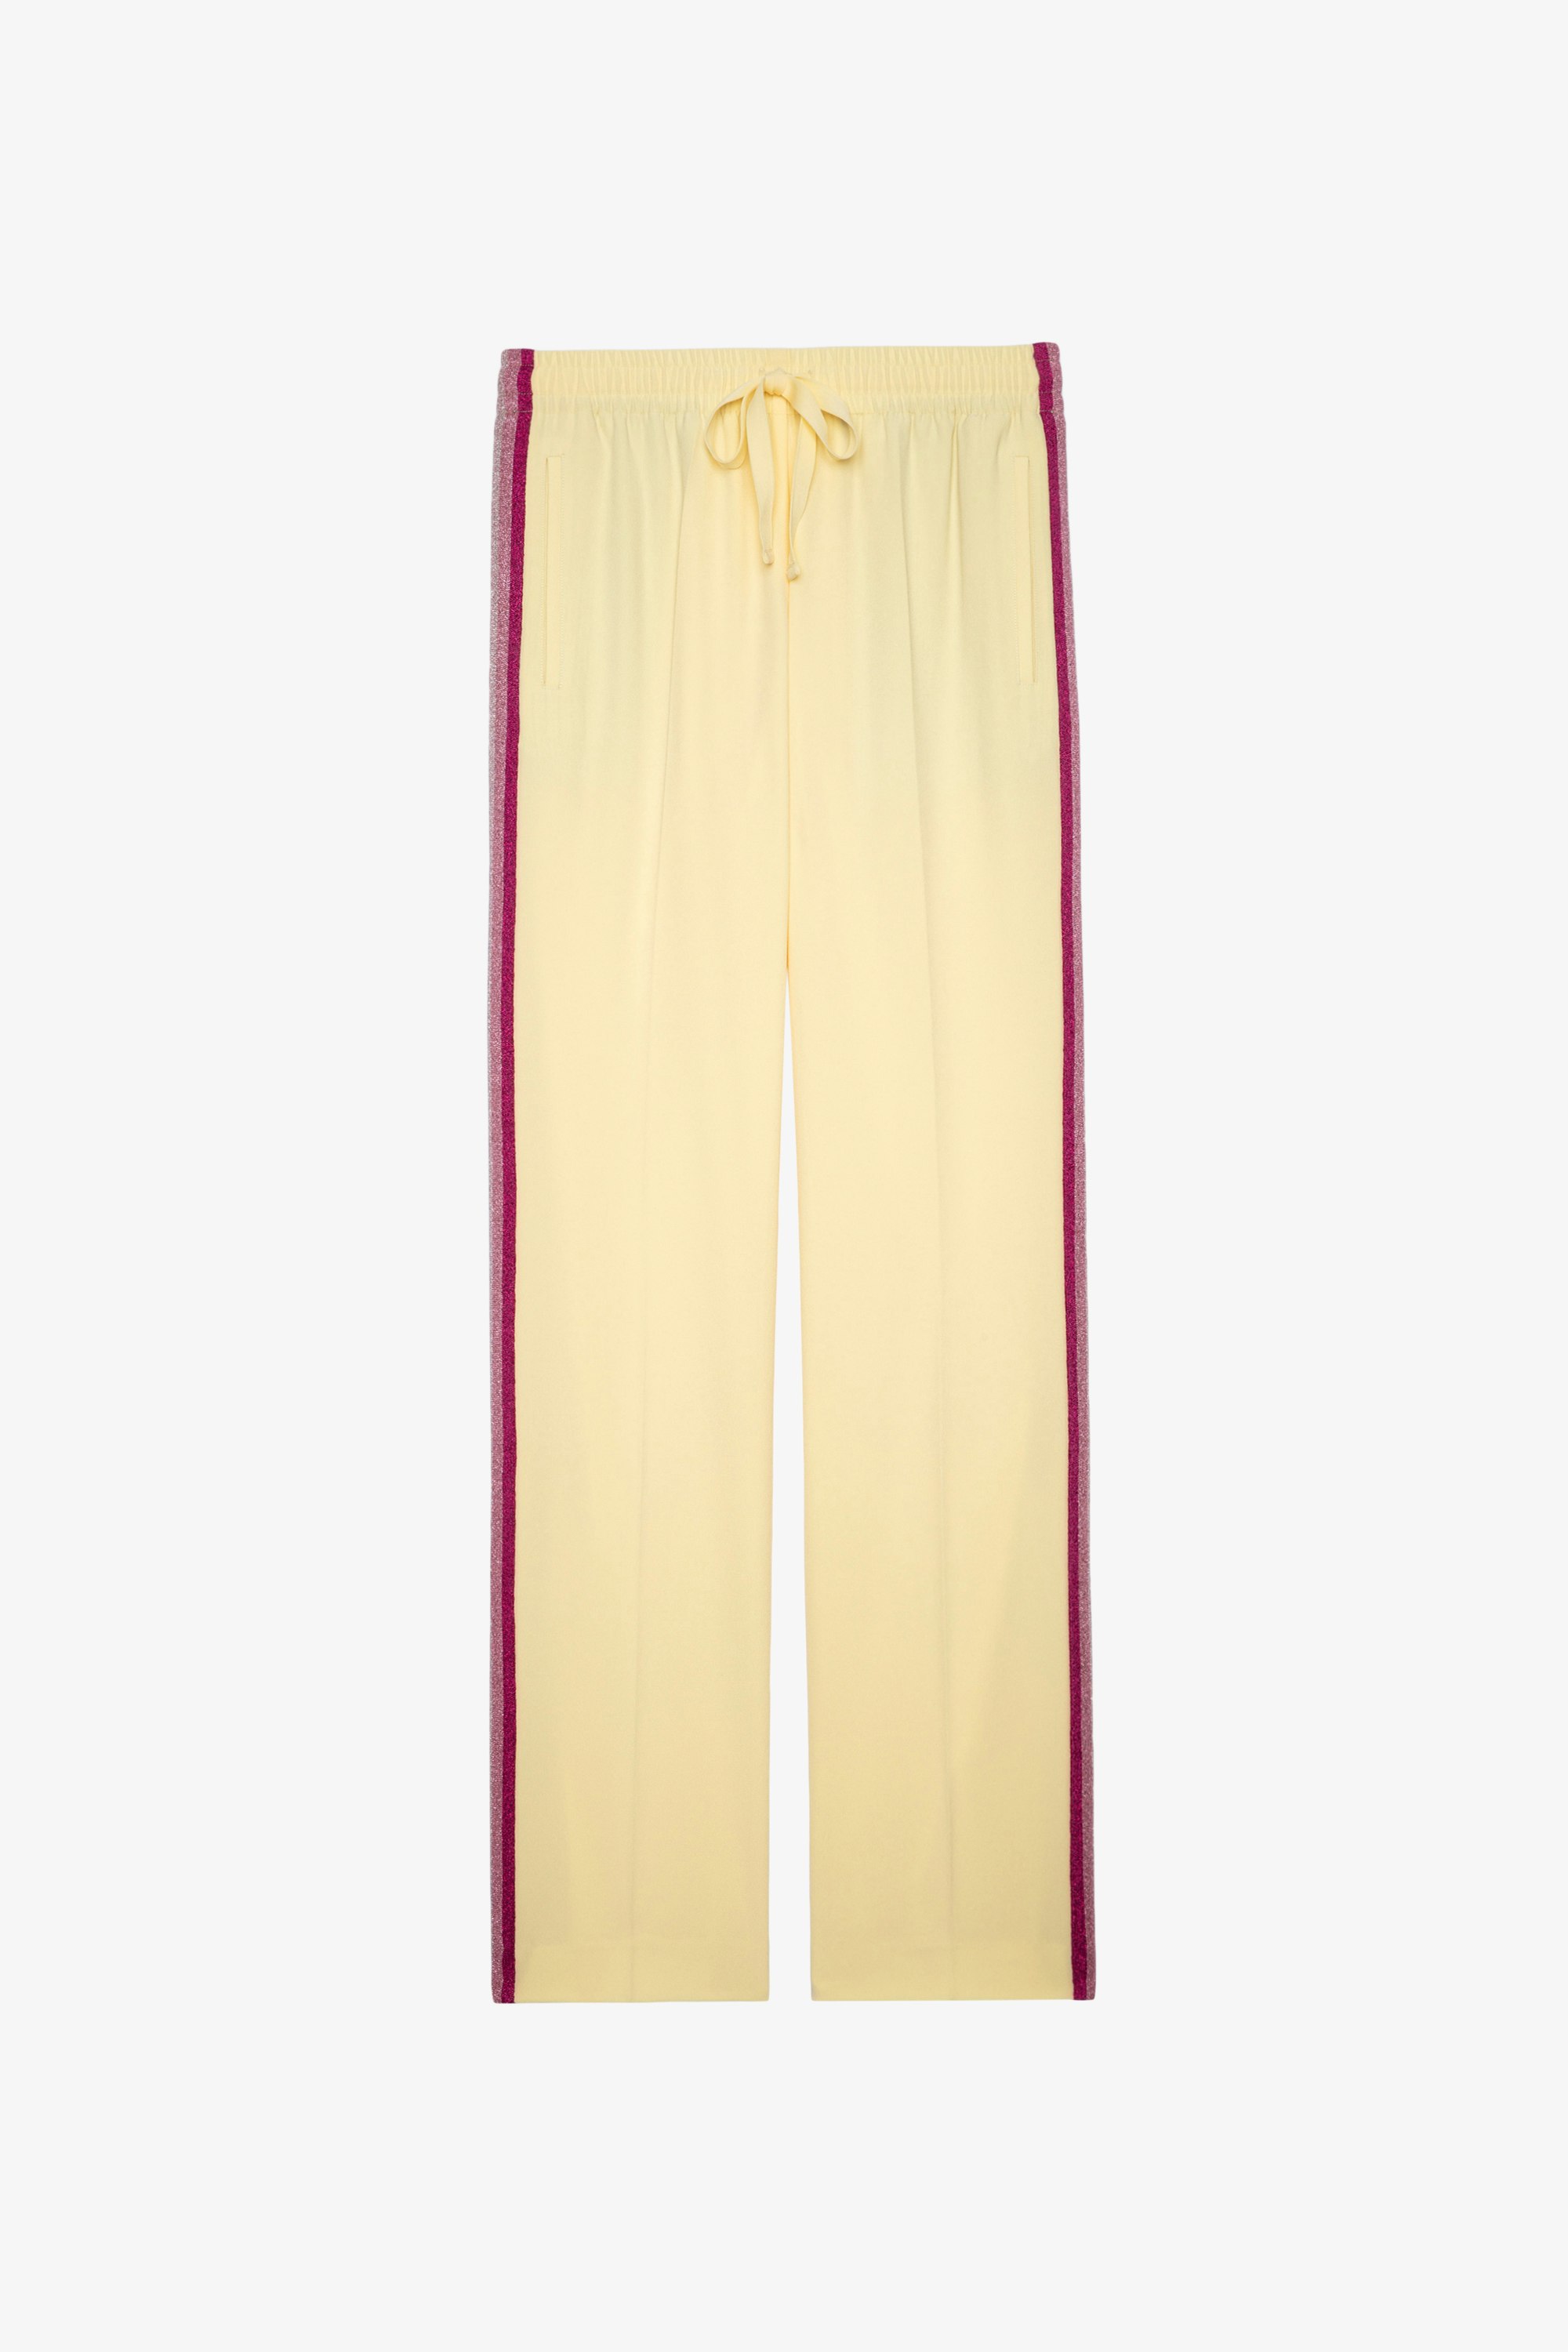 Pomy Crepe パンツ Women's flowing trousers in yellow with glittering side stripes